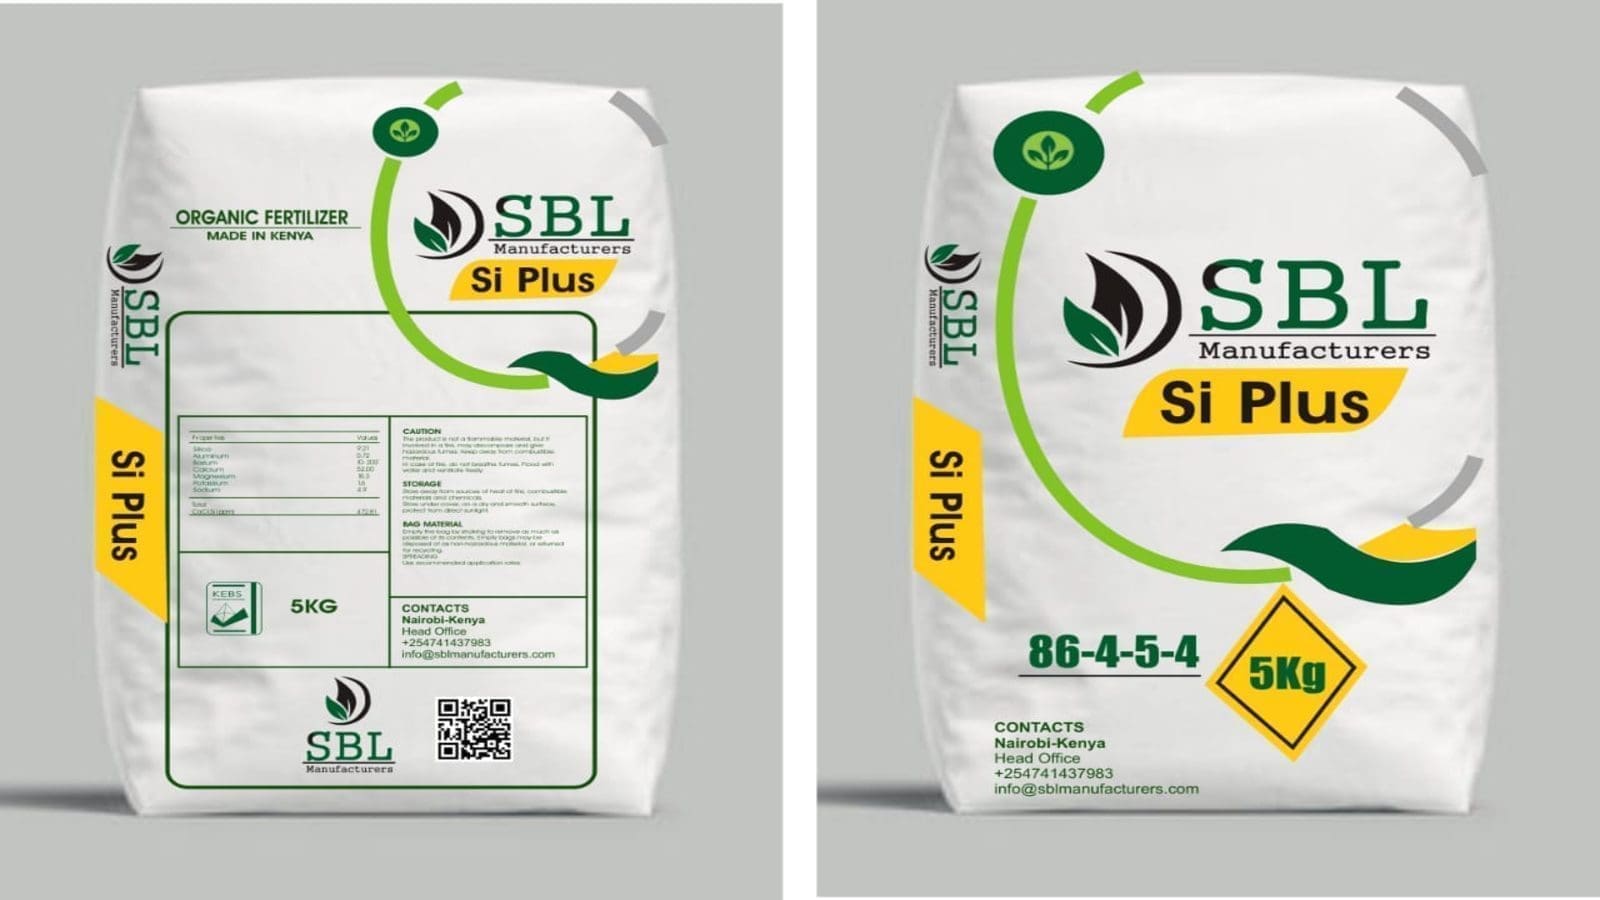 Organic fertilizer producer SBL Company signs pact to distribute fertilizer through NCBP and KFA